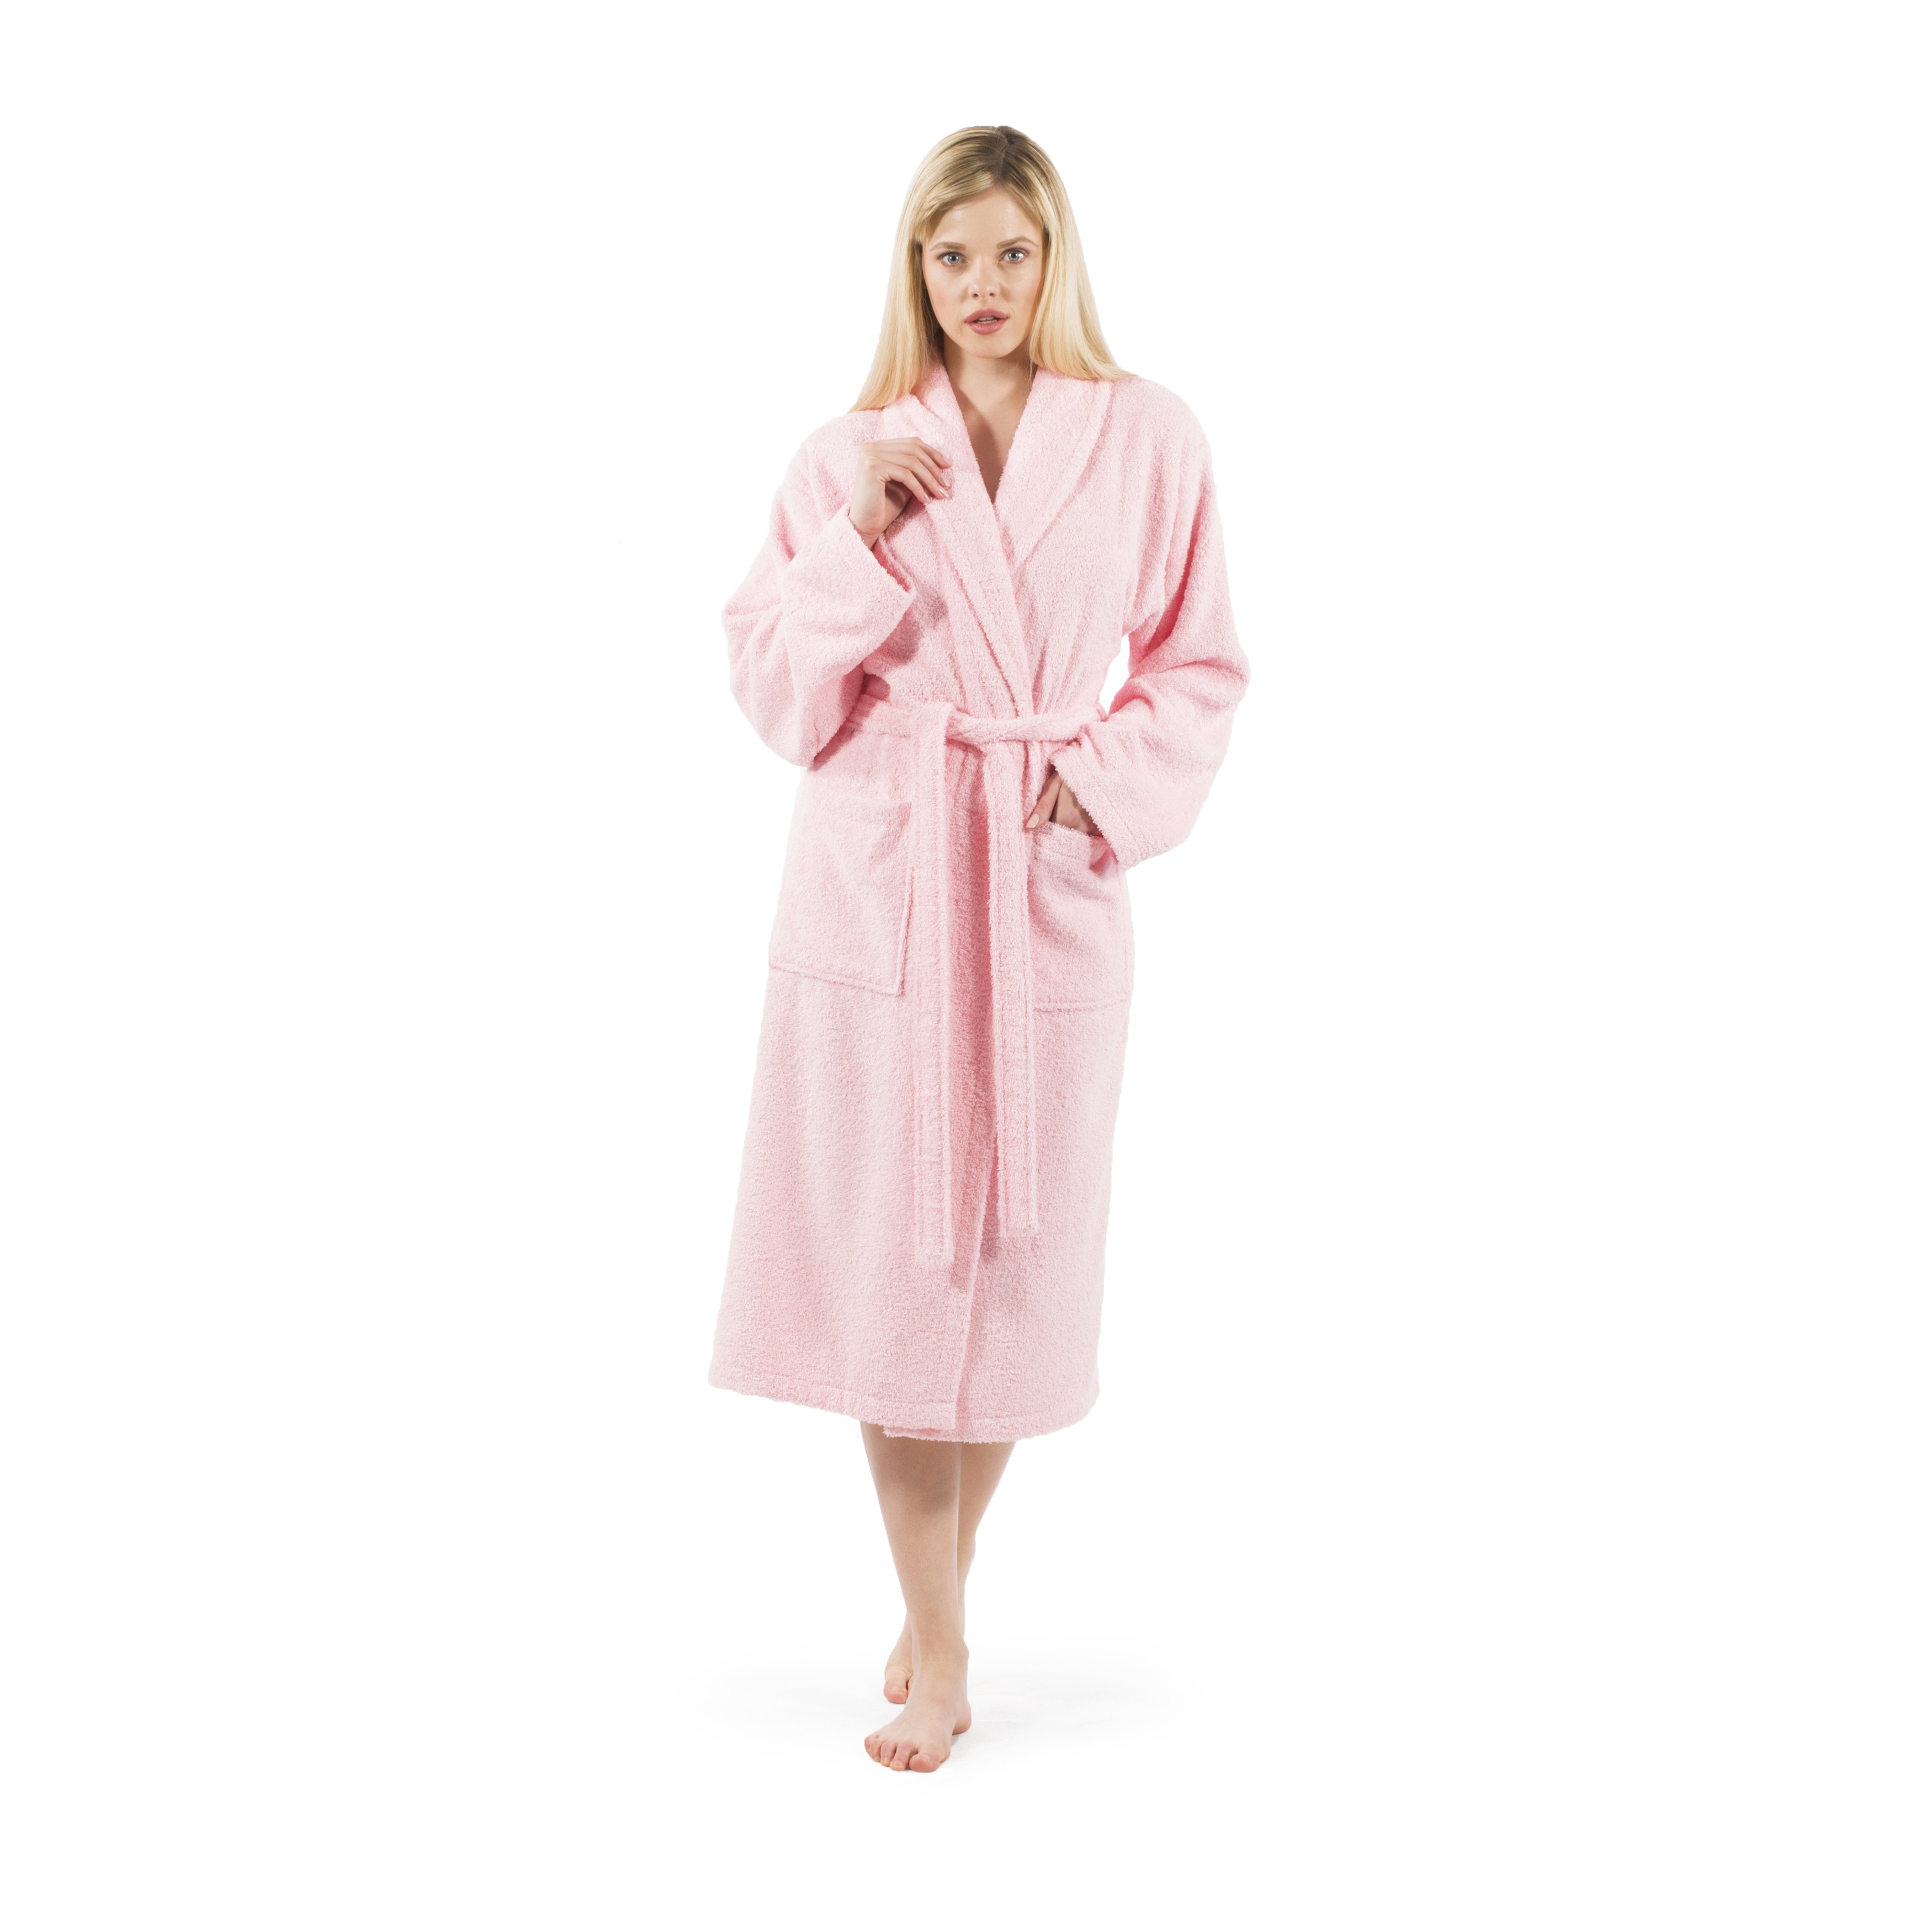 Linum Luxury Elite Hotel And Spa Collection 100 Turkish Cotton Terry Bath Robes Ebay 